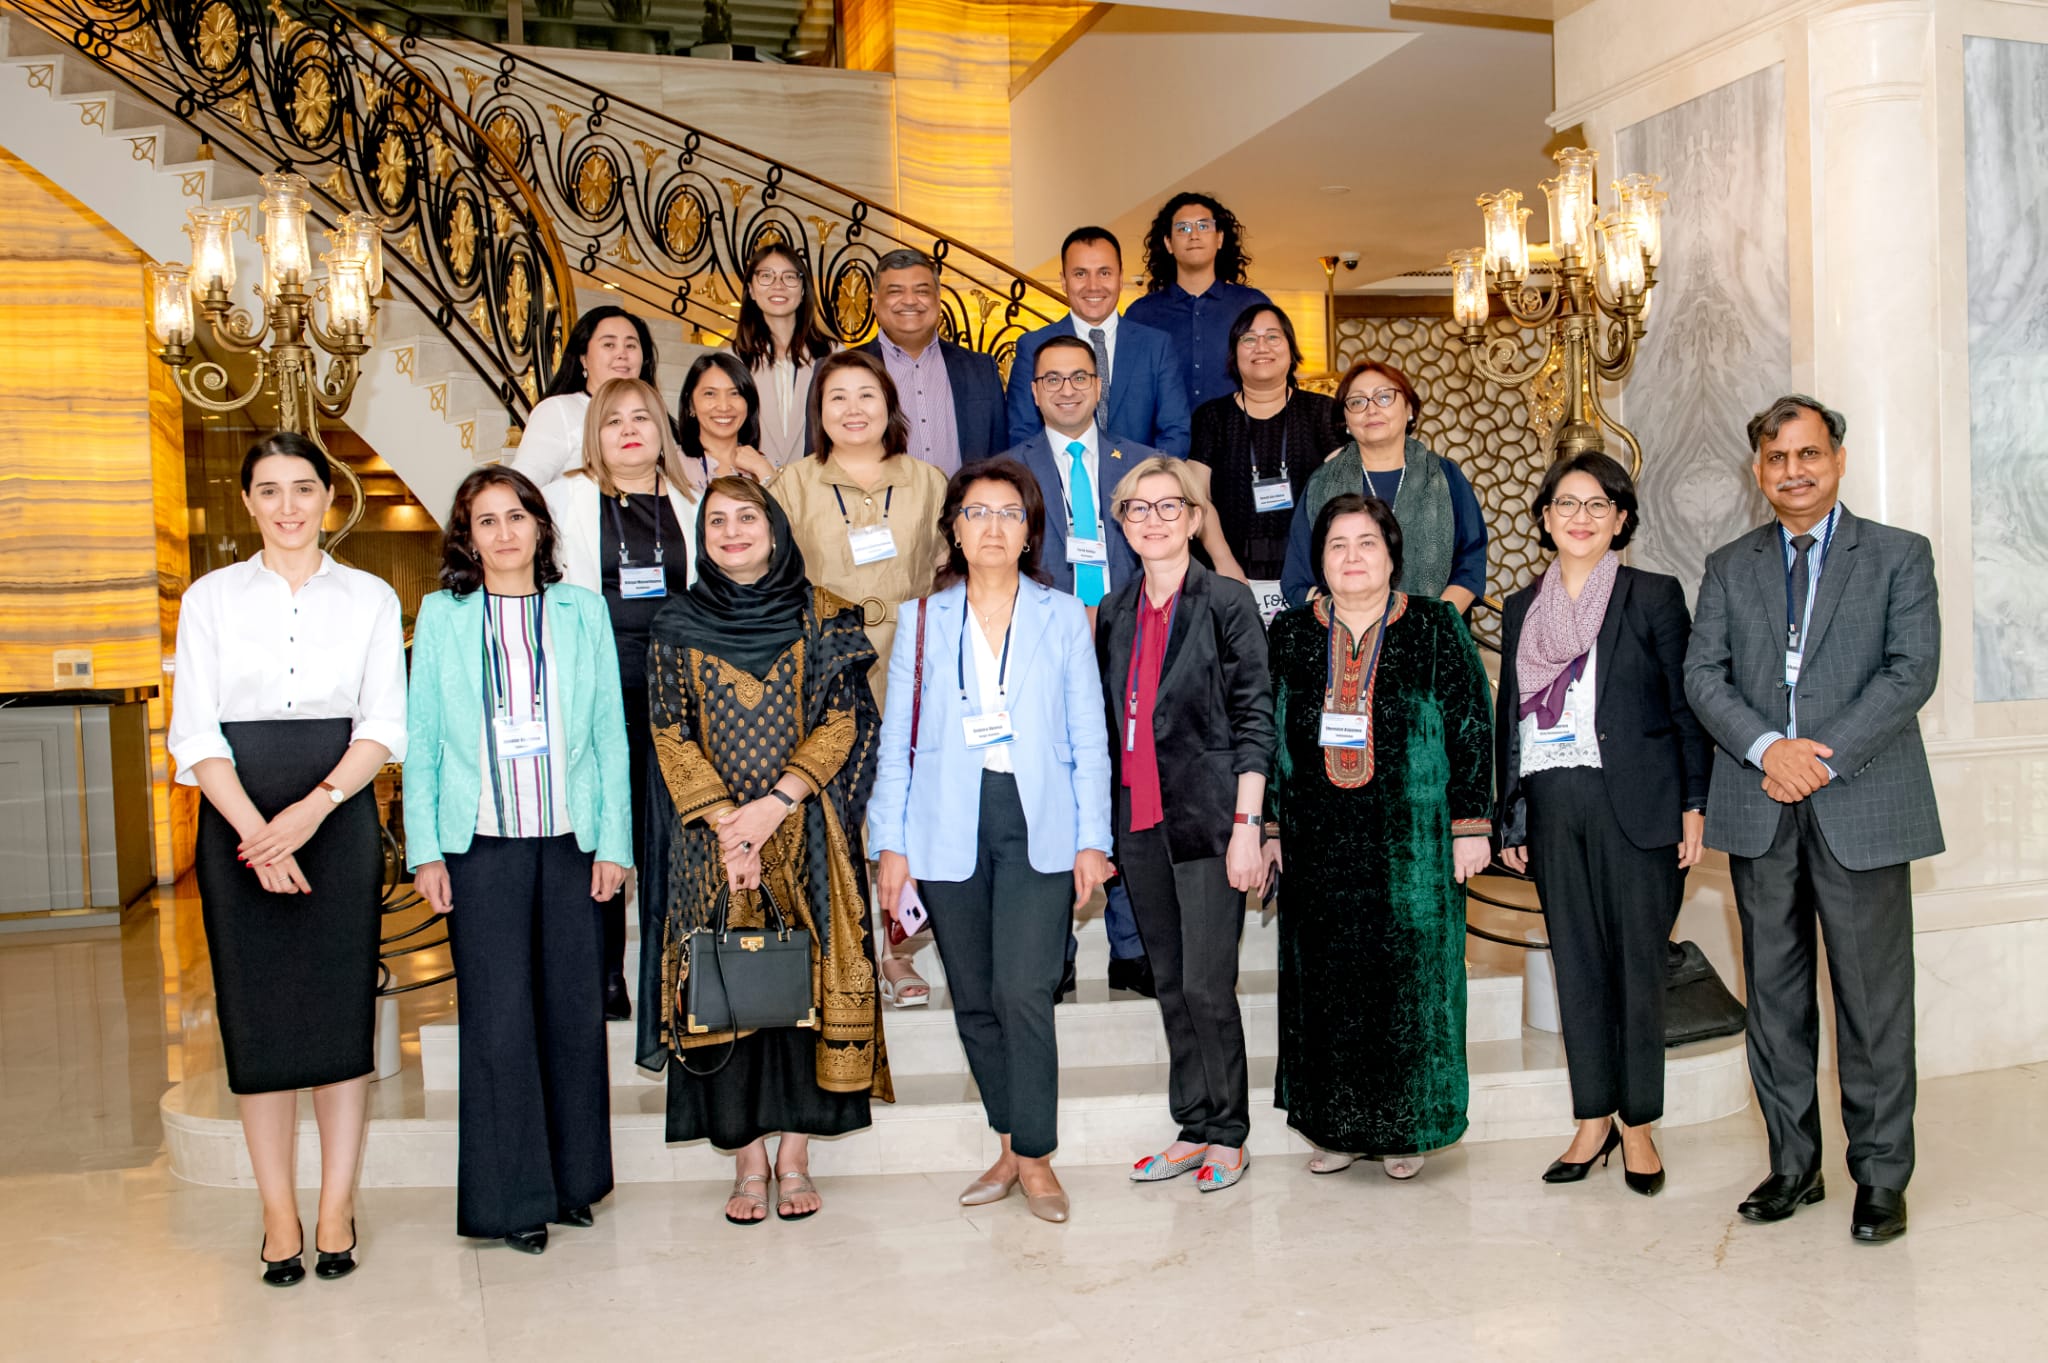 The department head of the State Committee participated in the first meeting of the Regional Expert Group on Gender Issues in Istanbul